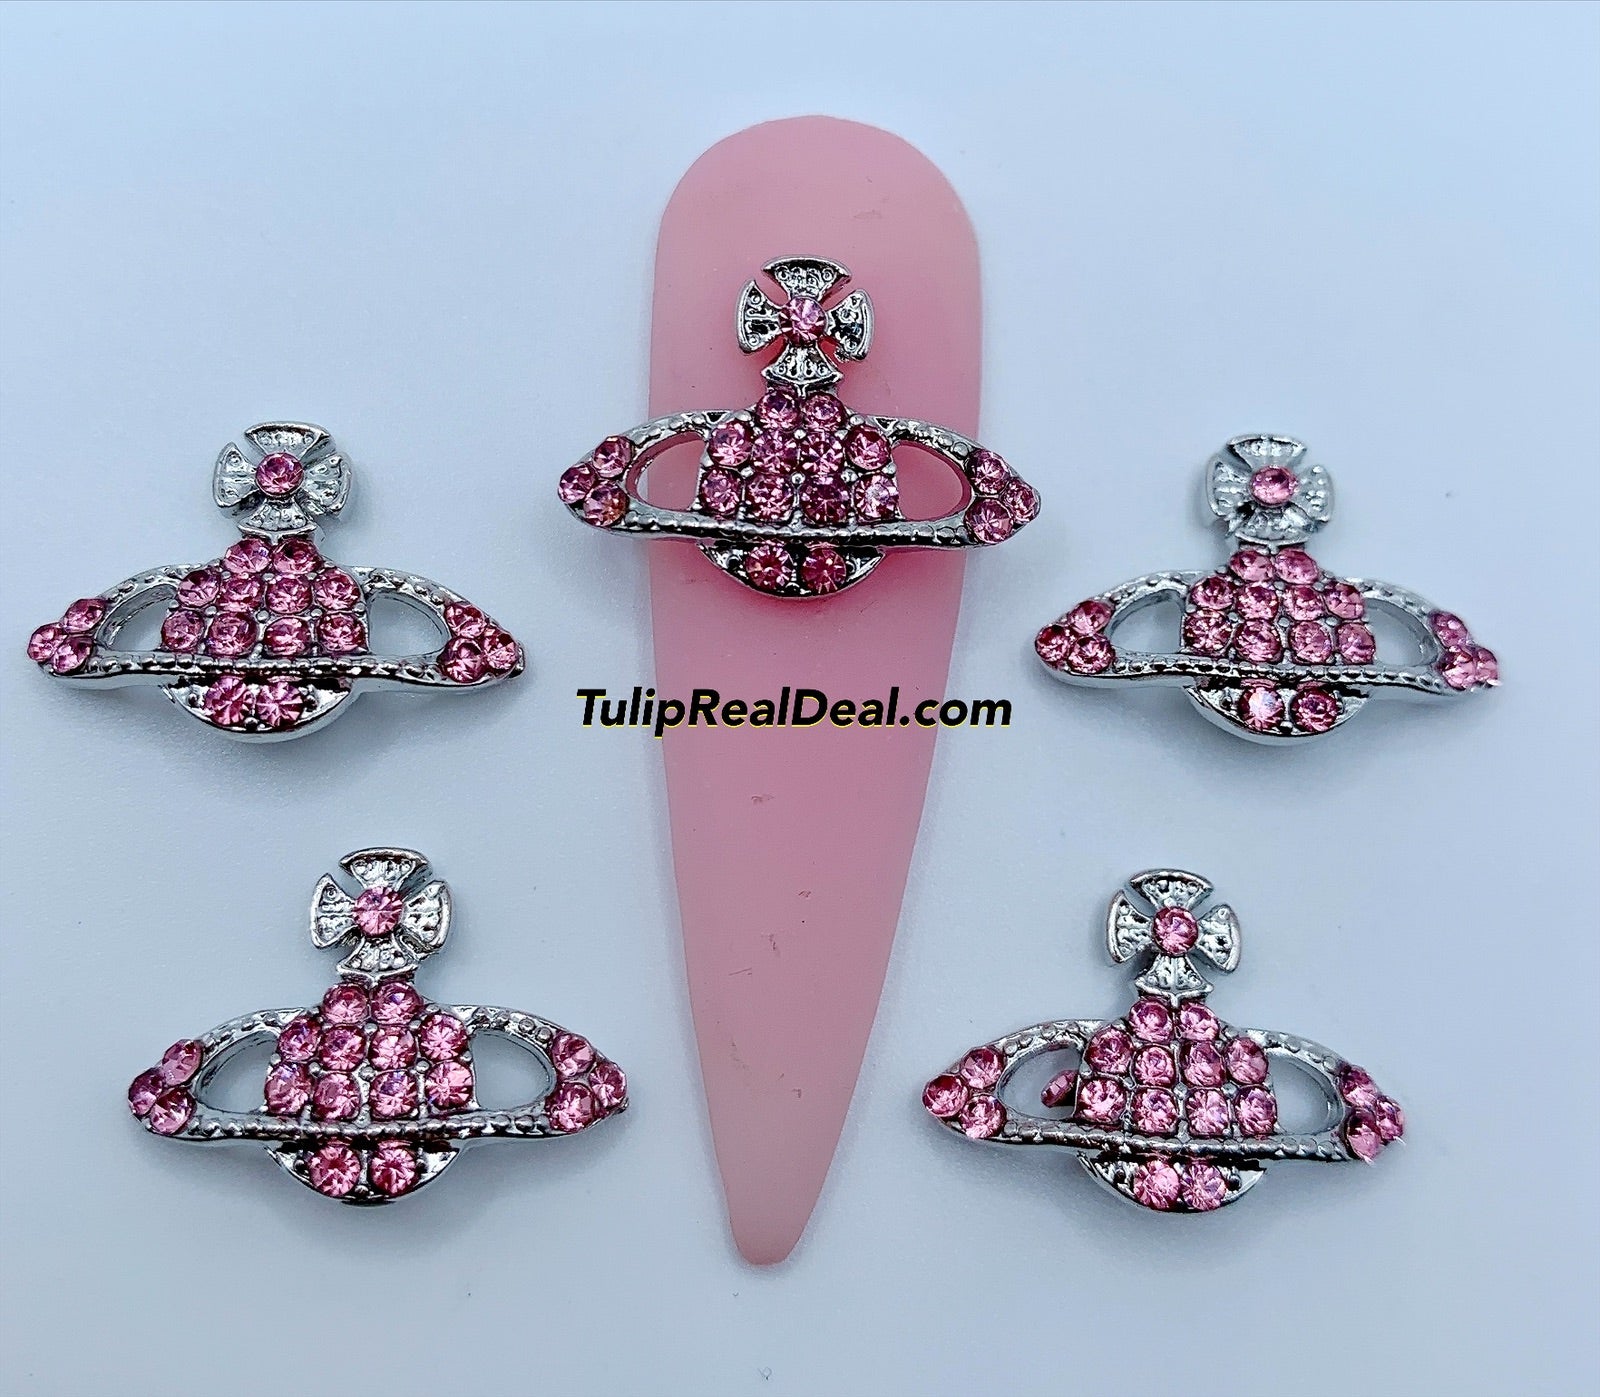 Planet cross pearl charms – Tulip Real Deal